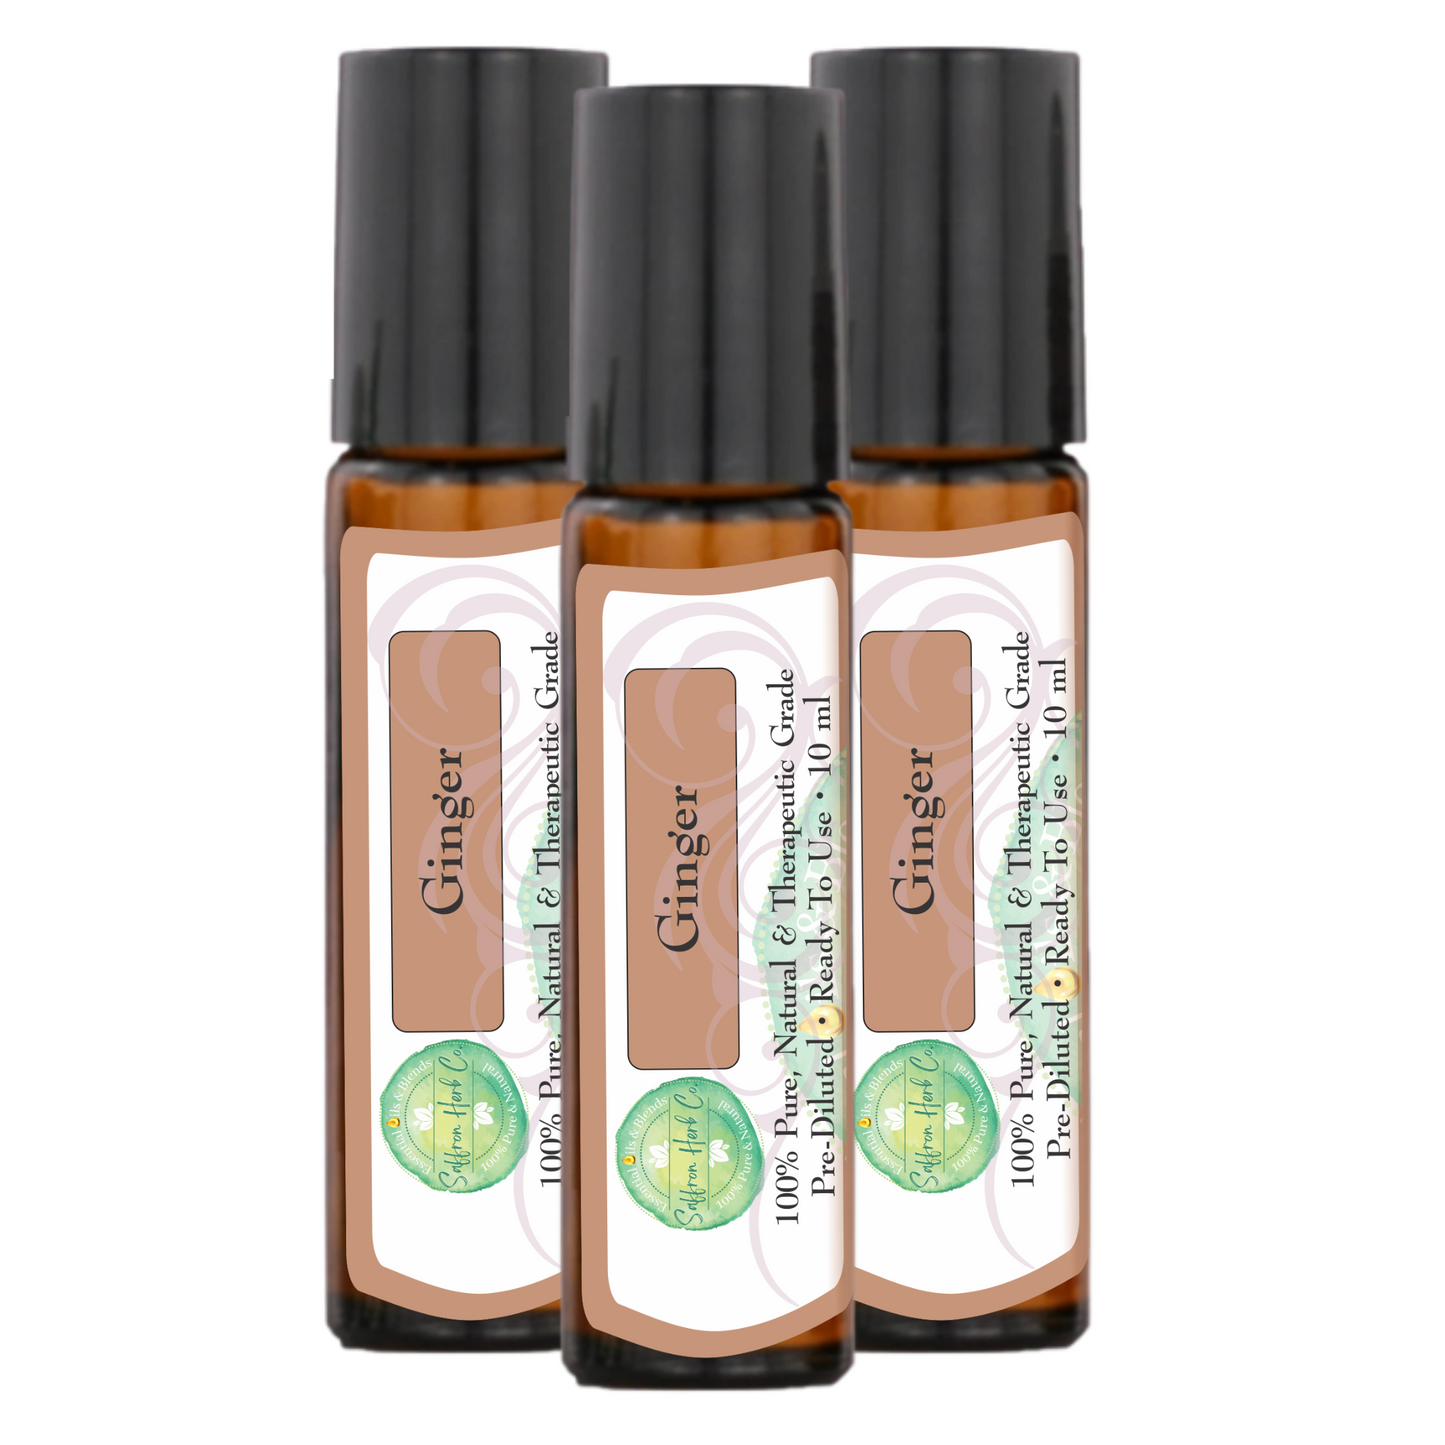 Ginger Essential Oil Roller Bottle Blend • 100% Pure & Natural • Pre-Diluted • Ready To Use